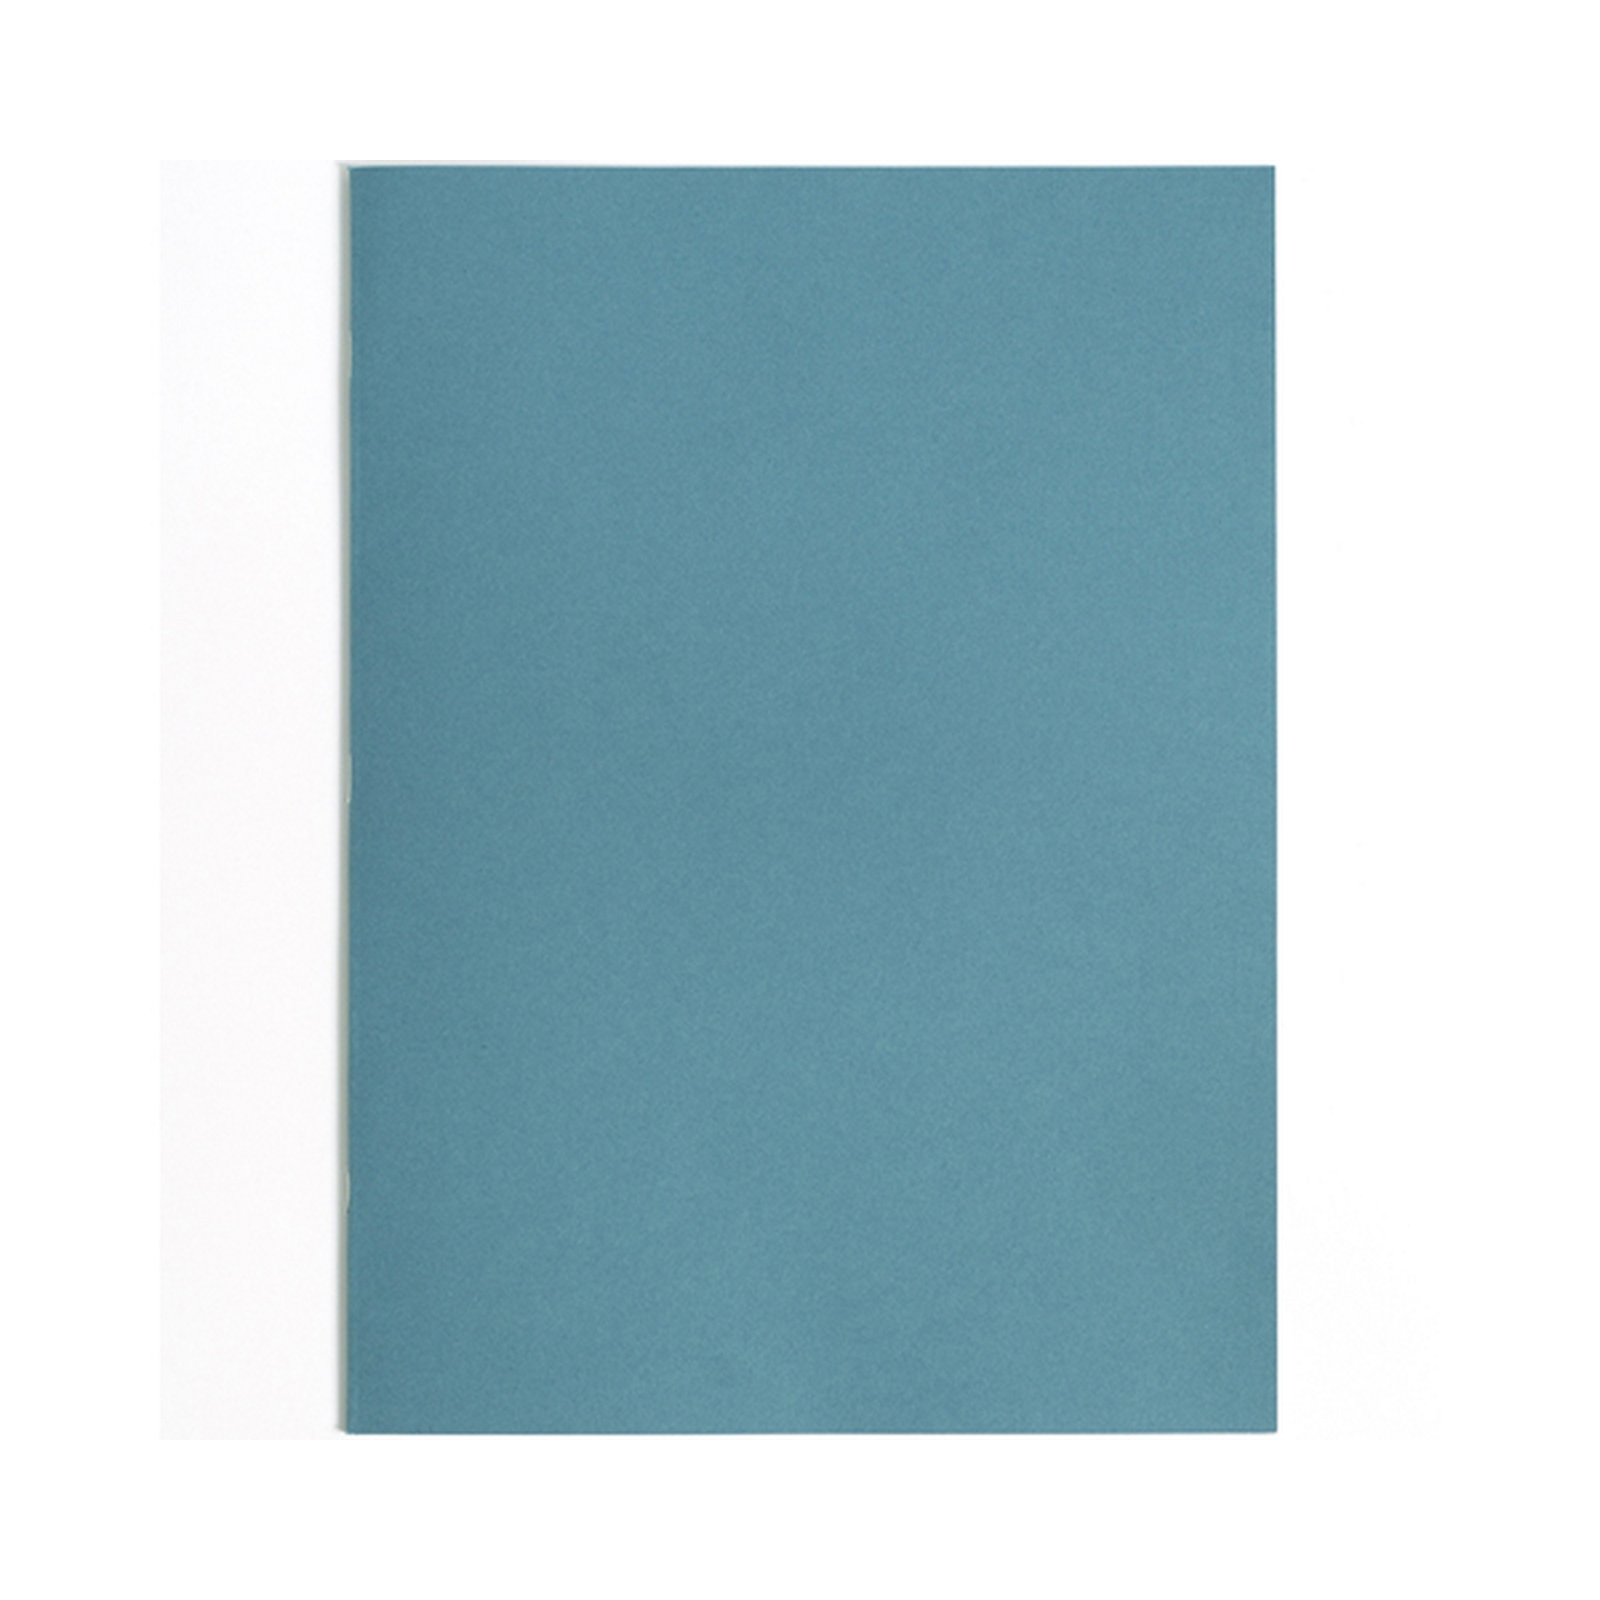 A4+/339 x 240mm Blue Cover Top Half Plain/Lower Half 12mm Ruled Project Book - 40 pages - Pack of 100